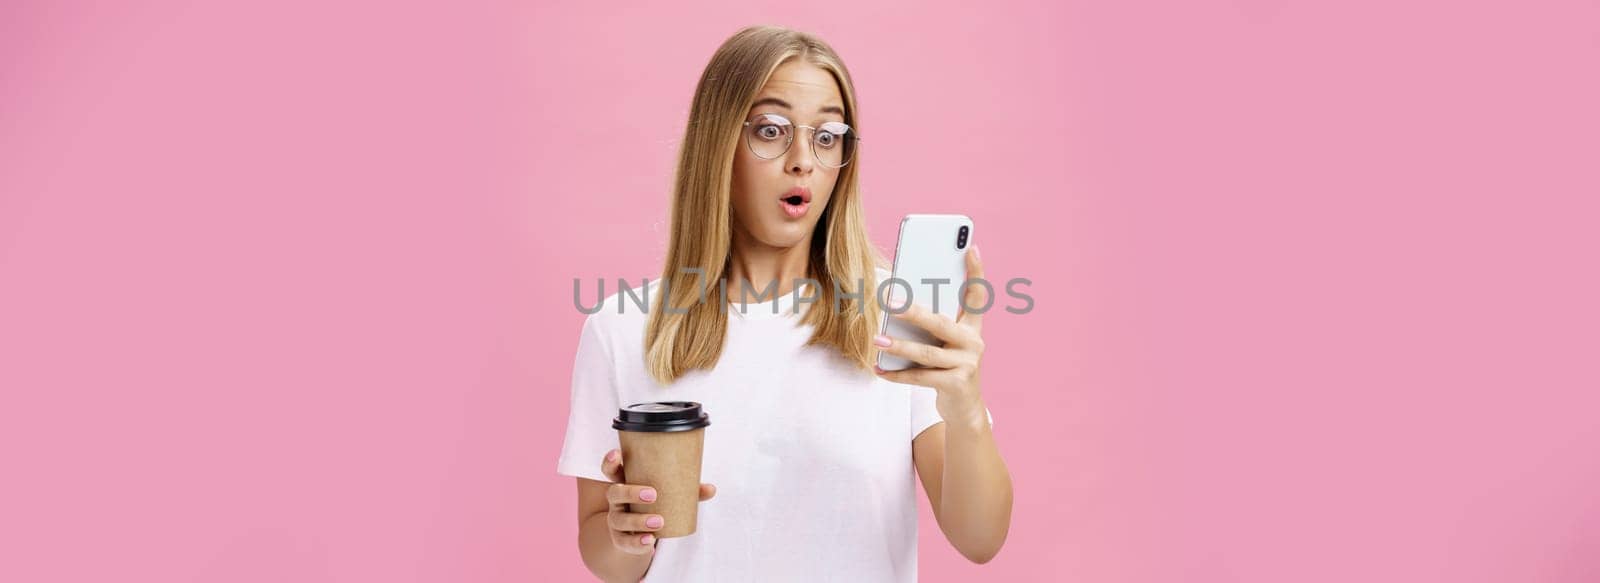 Woman drinking coffee being shocked by received message reacting on stunning news folding lips gasping looking astonished and impressed at smartphone screen holding paper cup, posing over pink wall. Technology concept